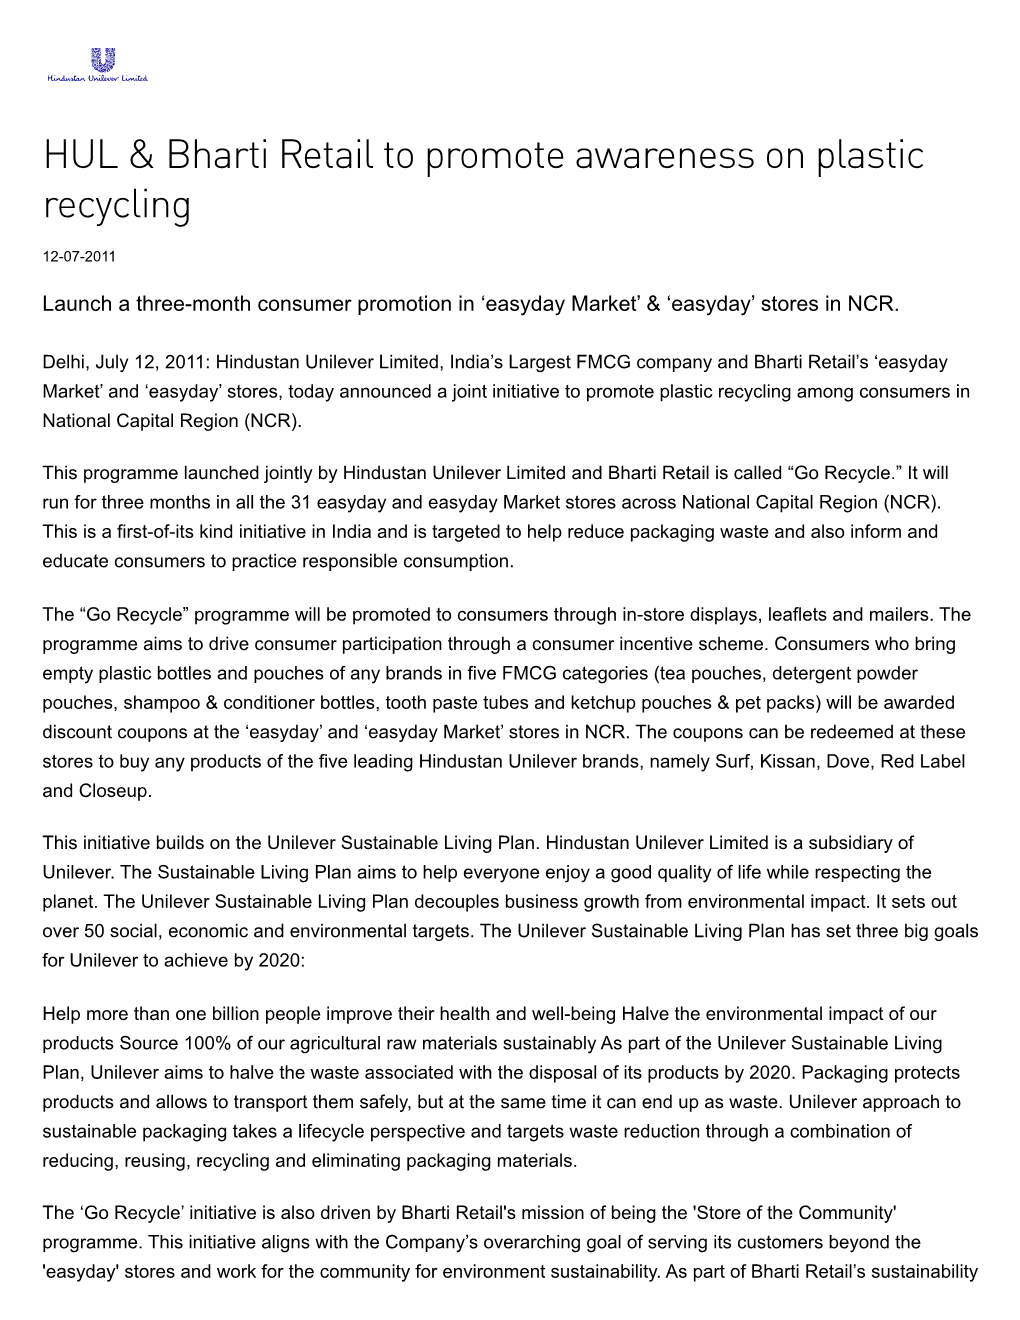 HUL & Bharti Retail to Promote Awareness on Plastic Recycling